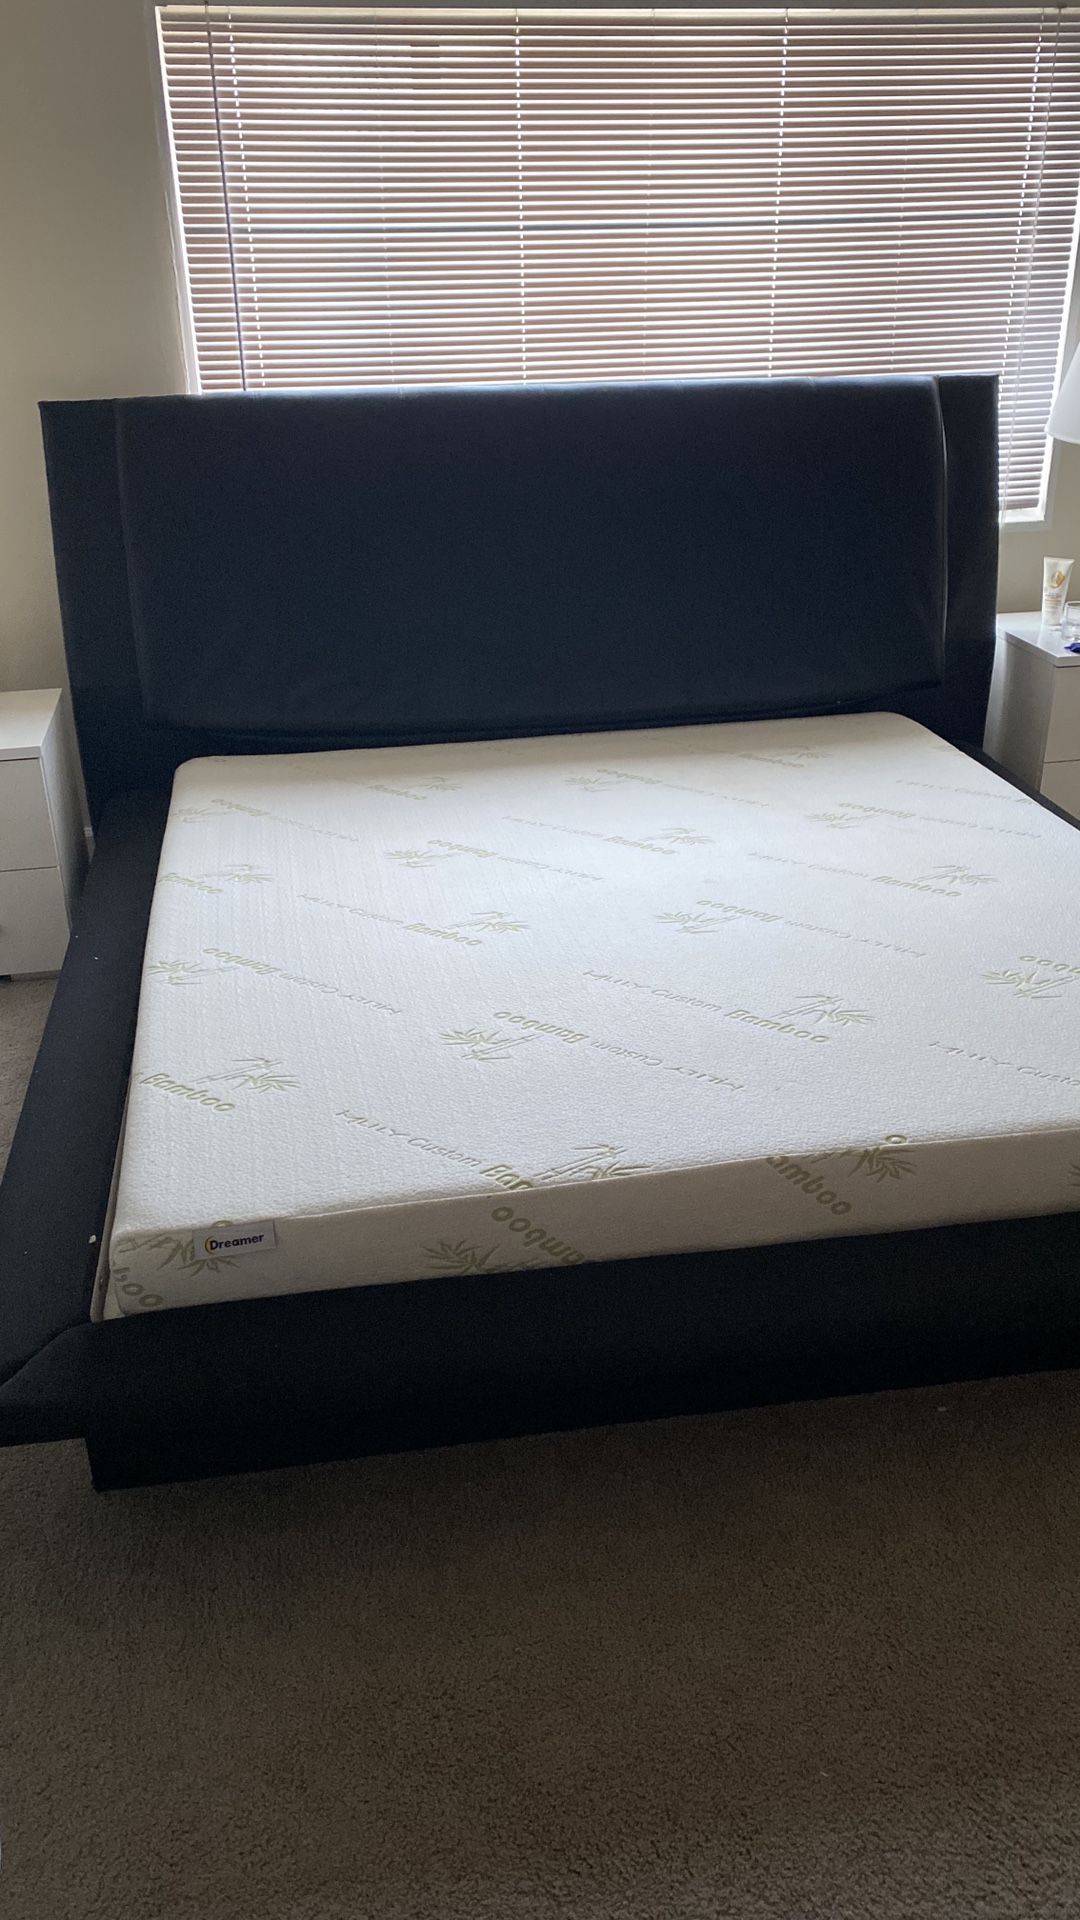 King size black leather bed $200